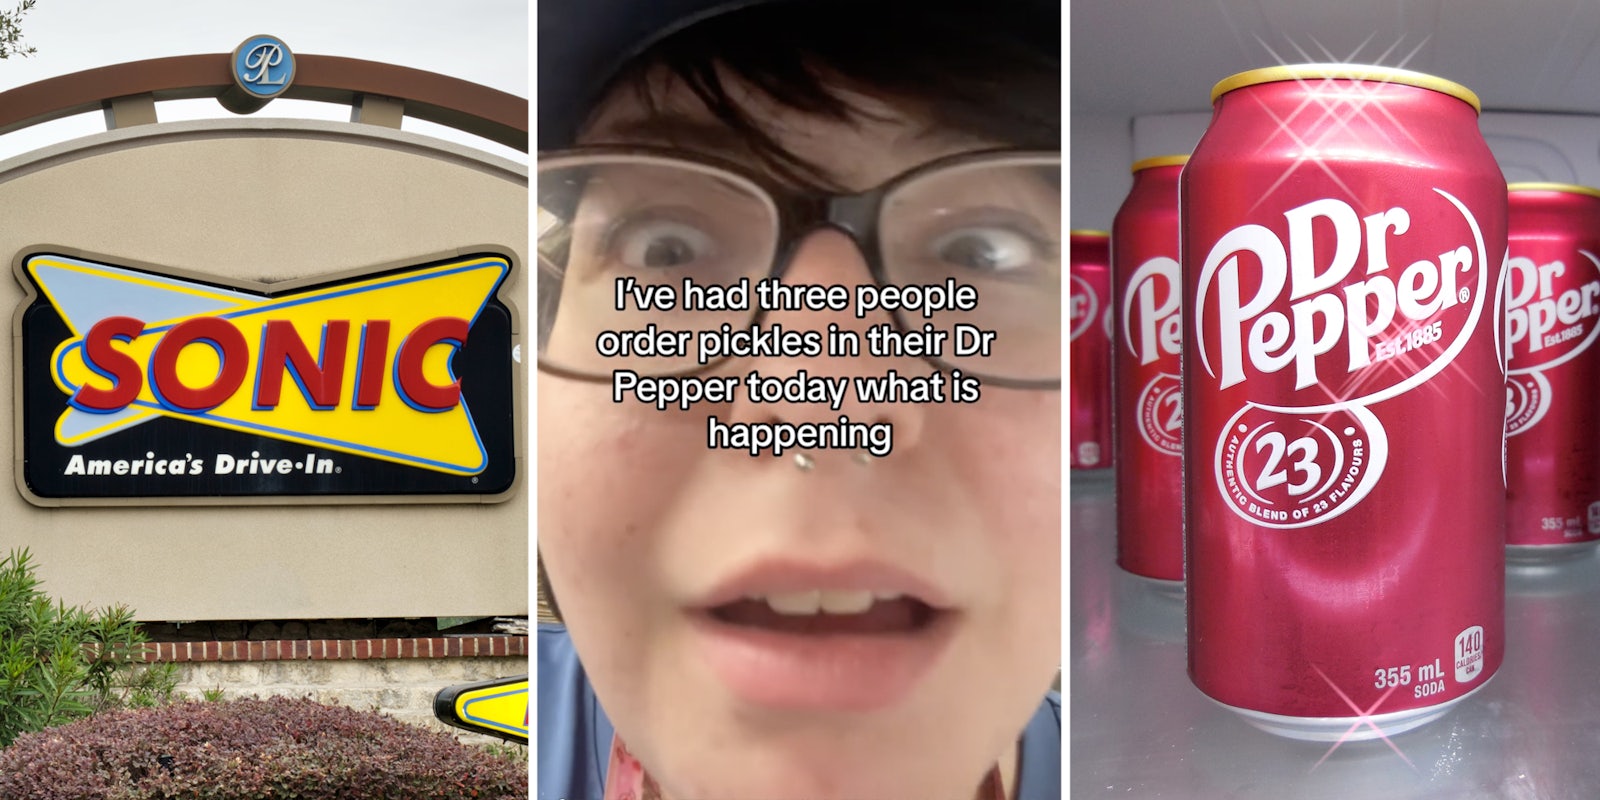 Sonic sign(l), Close up of face with text 'I've had three people order pickles in their dr pepper today what is happening'(c), Dr Pepper cans(r)